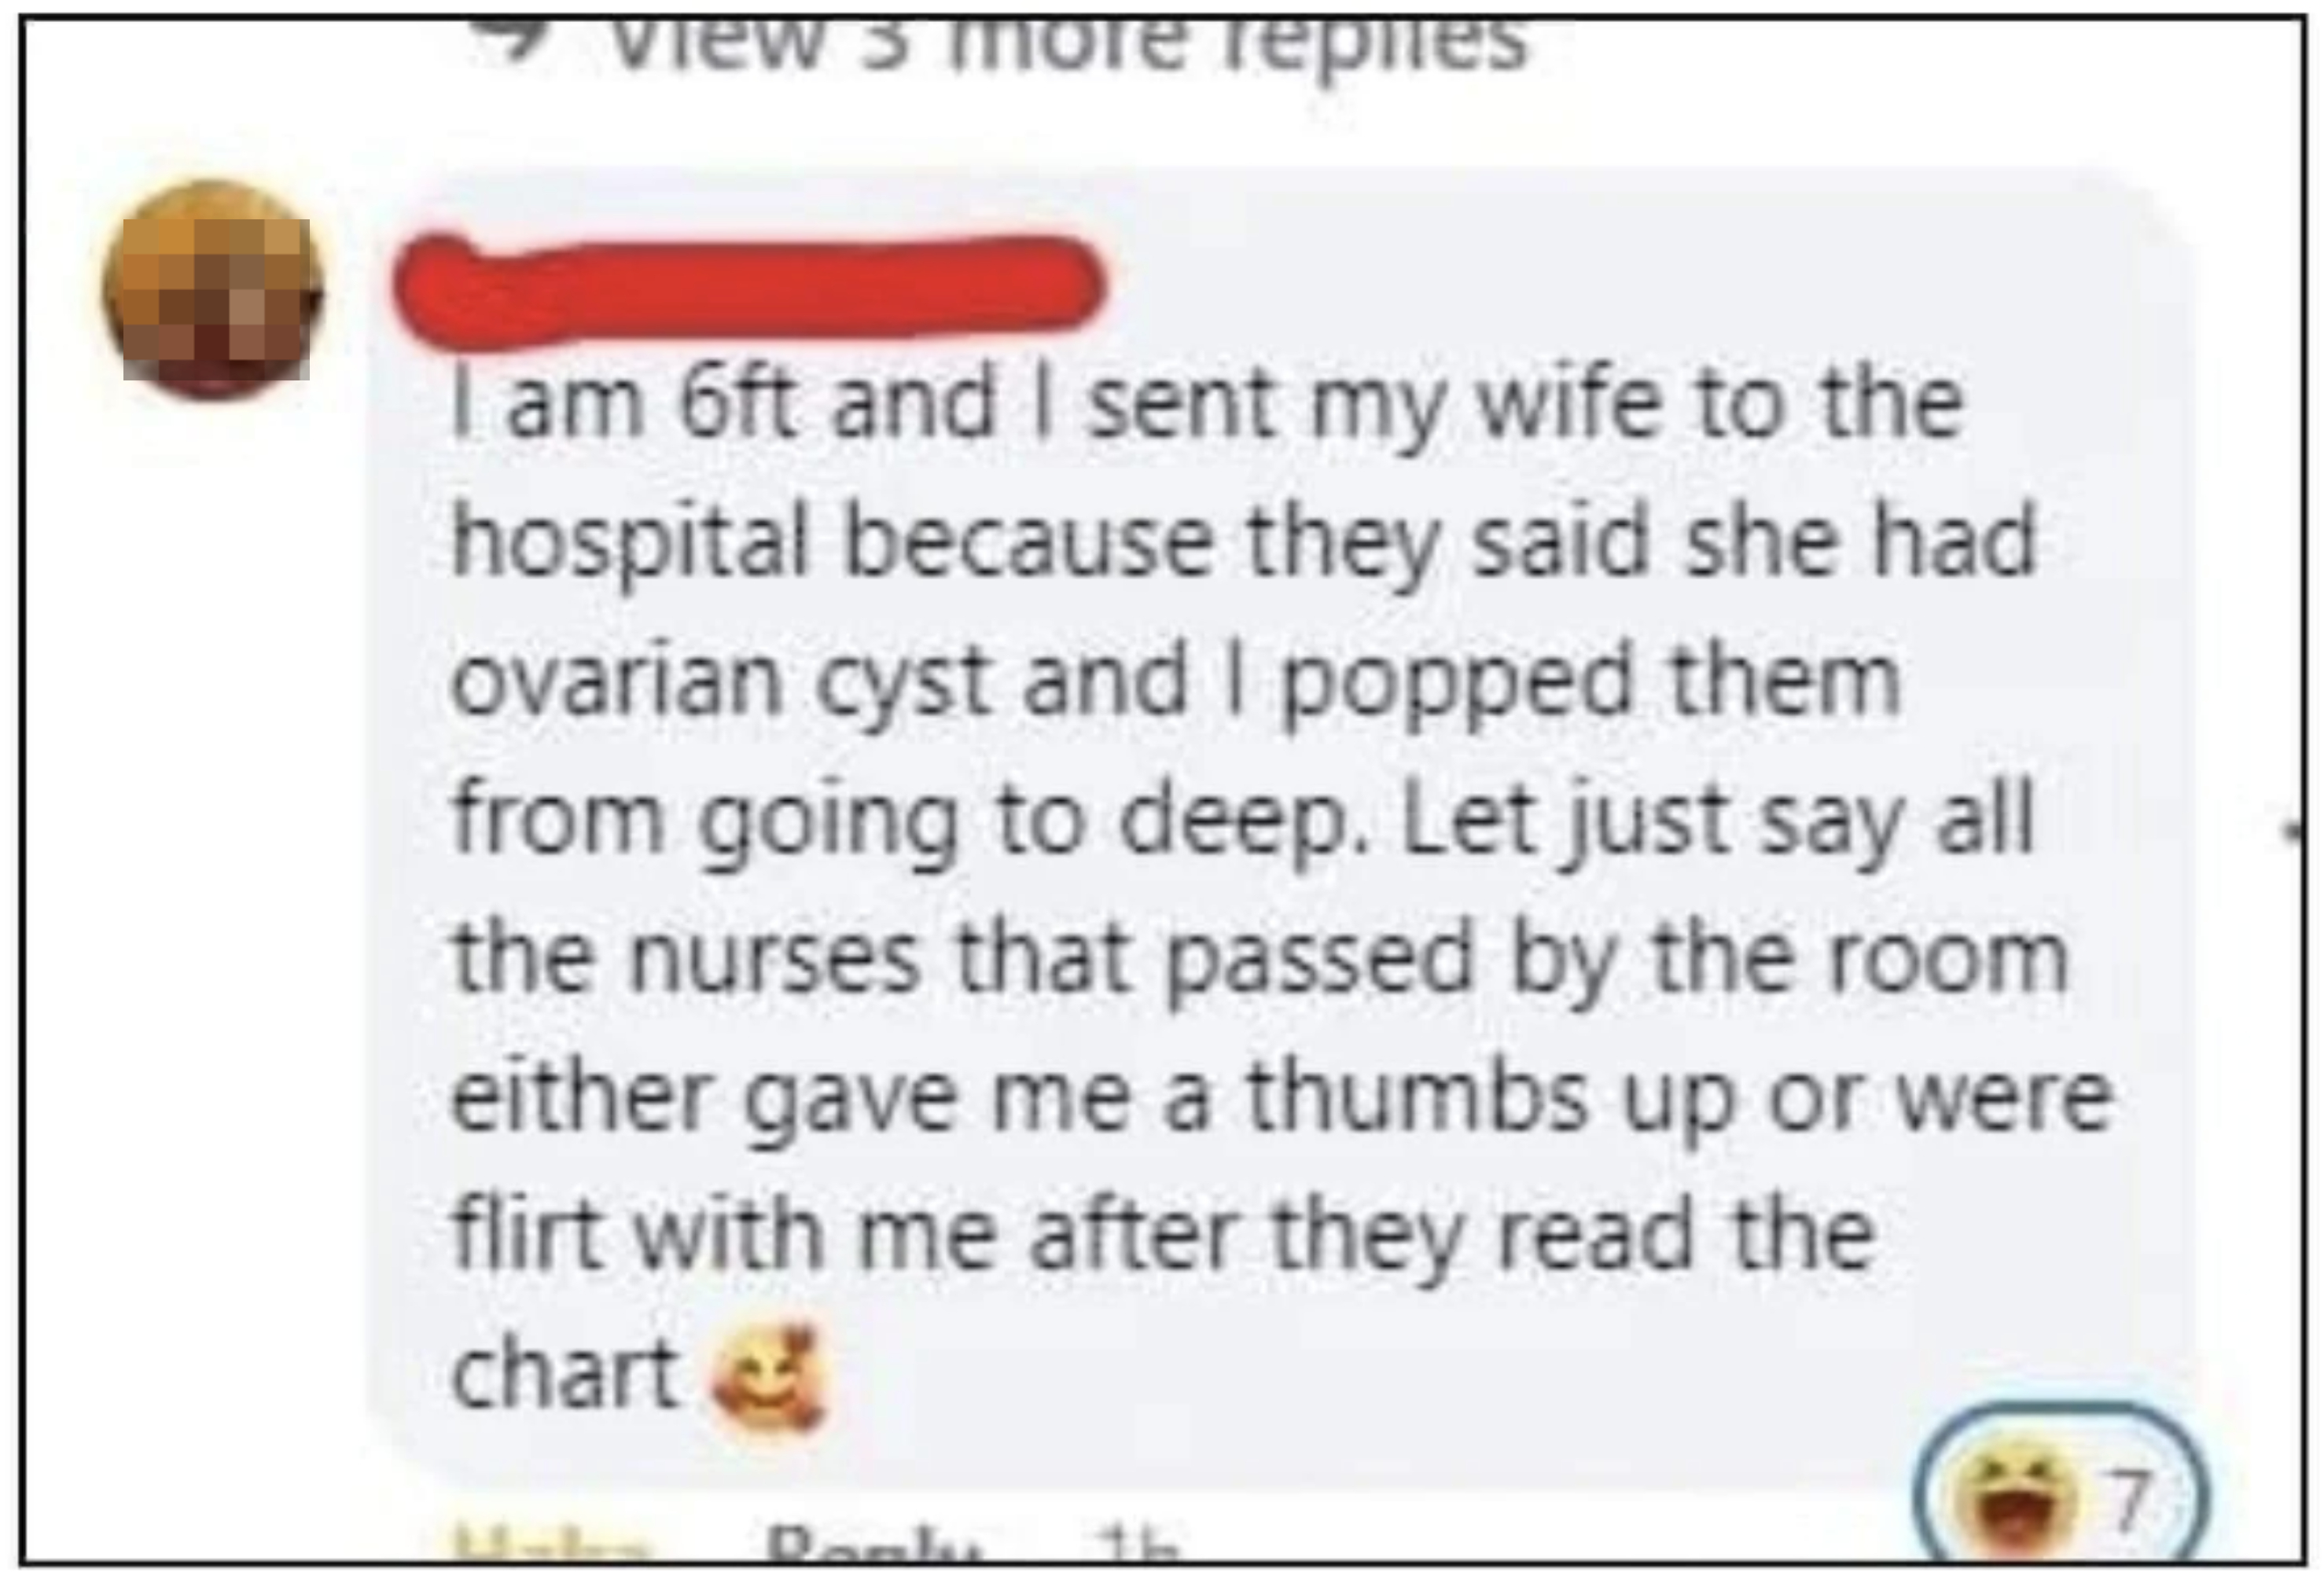 Guy who&#x27;s 6 feet and sent his wife to the hospital because he went &quot;too deep&quot; and popped her ovarian cyst says the nurses were giving him a thumbs-up and flirting after they read the chart